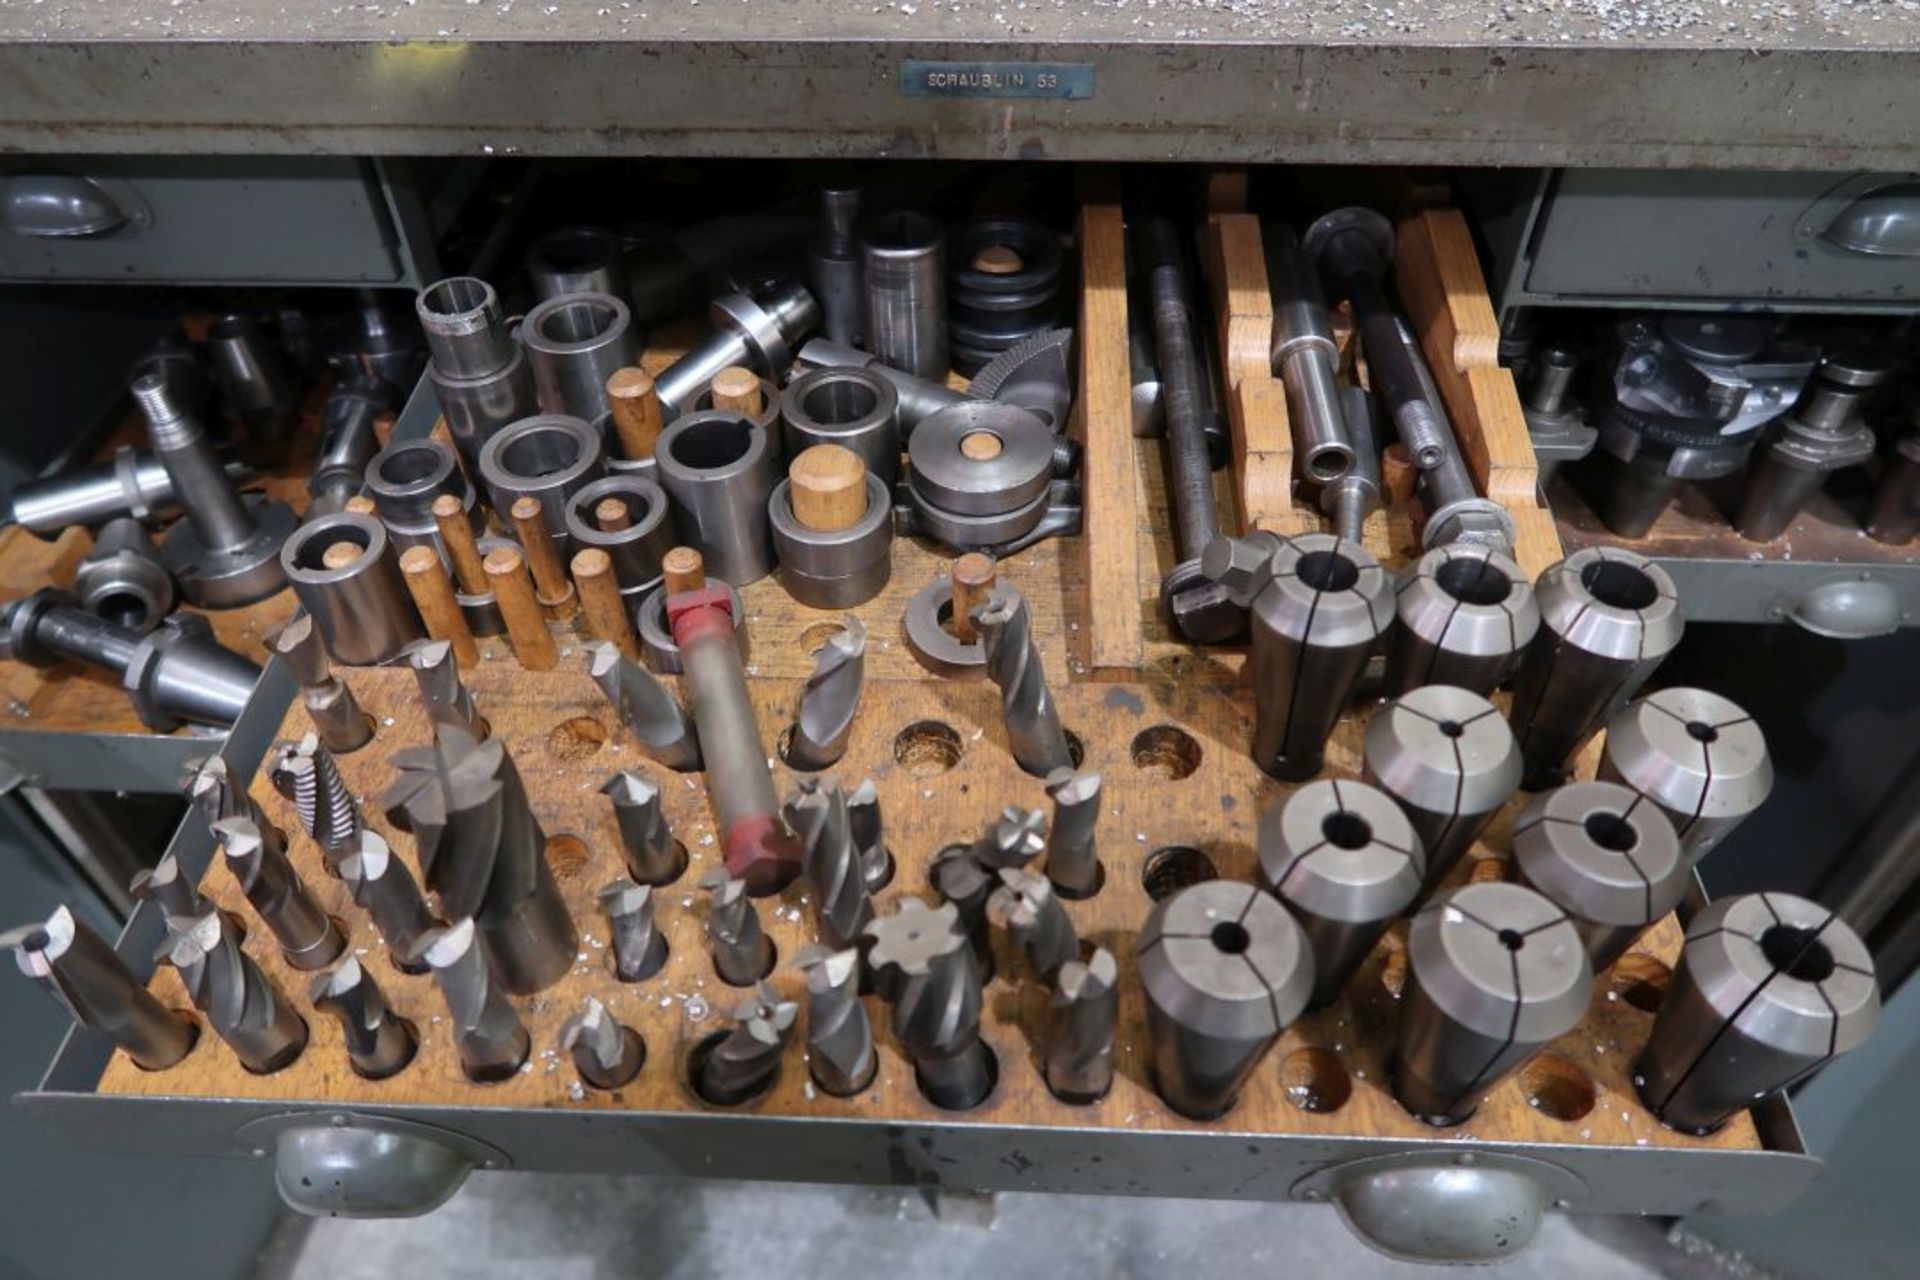 SHAUBLIN MOD: 53 UNIVERSAL HORIZONTAL MILLING MACHINE W/ CUTTING TOOLS, COLLETS, HOLDERS, INDEXING - Image 3 of 6